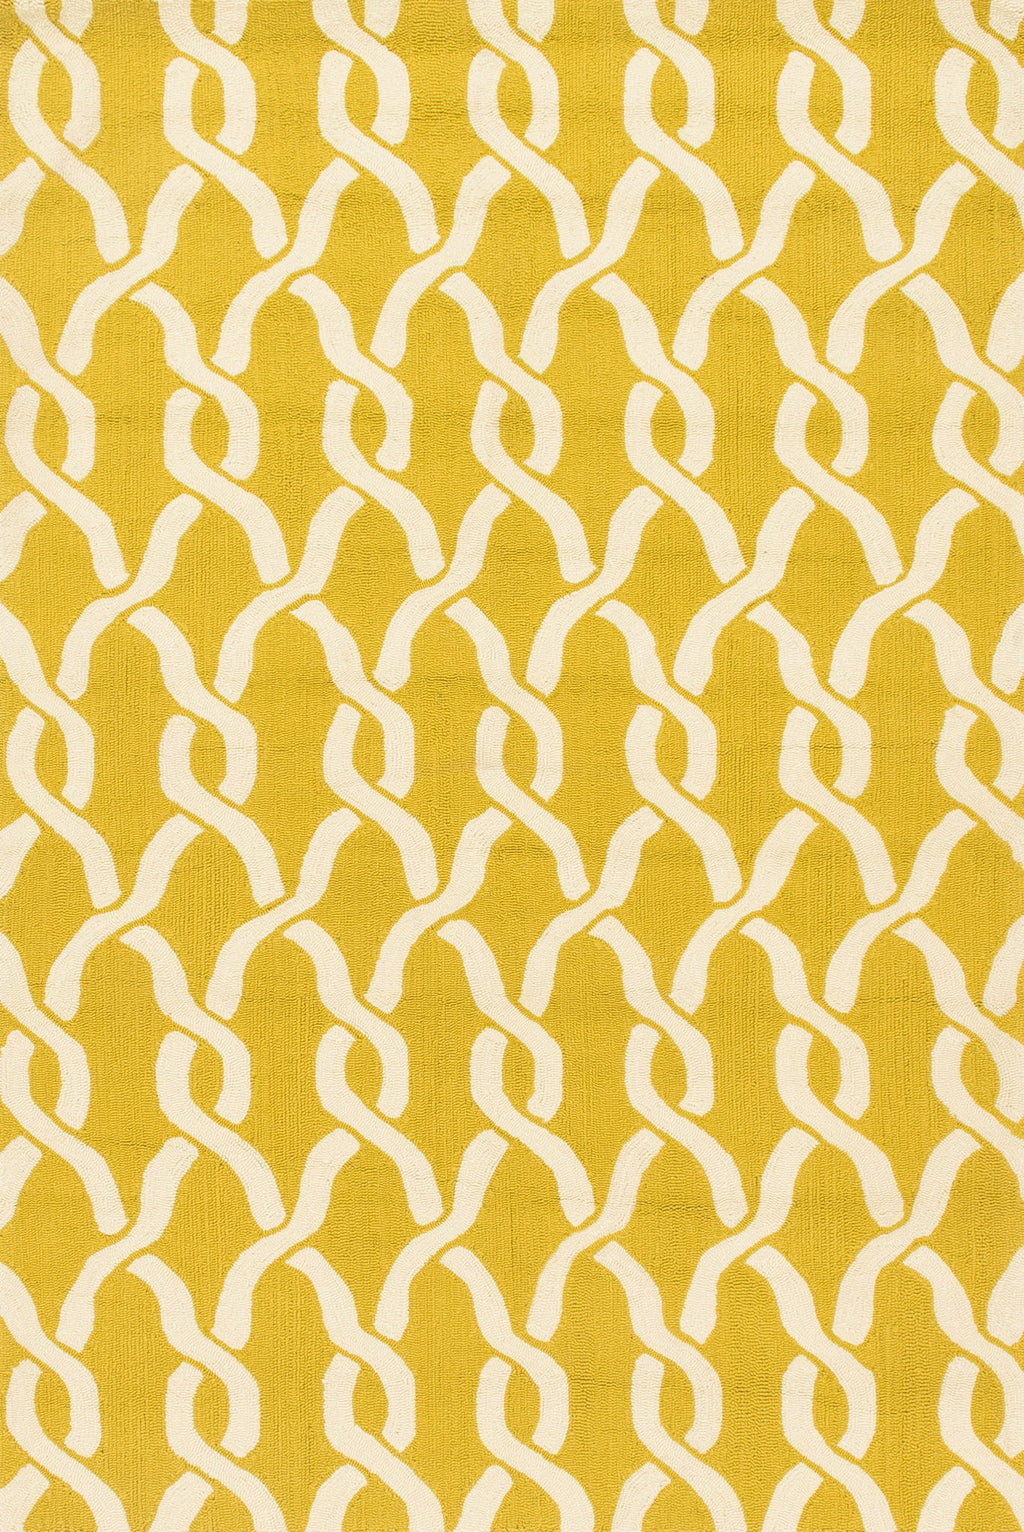 VENICE BEACH Collection Rug  in  GOLDENROD / IVORY Yellow Small Hand-Hooked Polypropylene